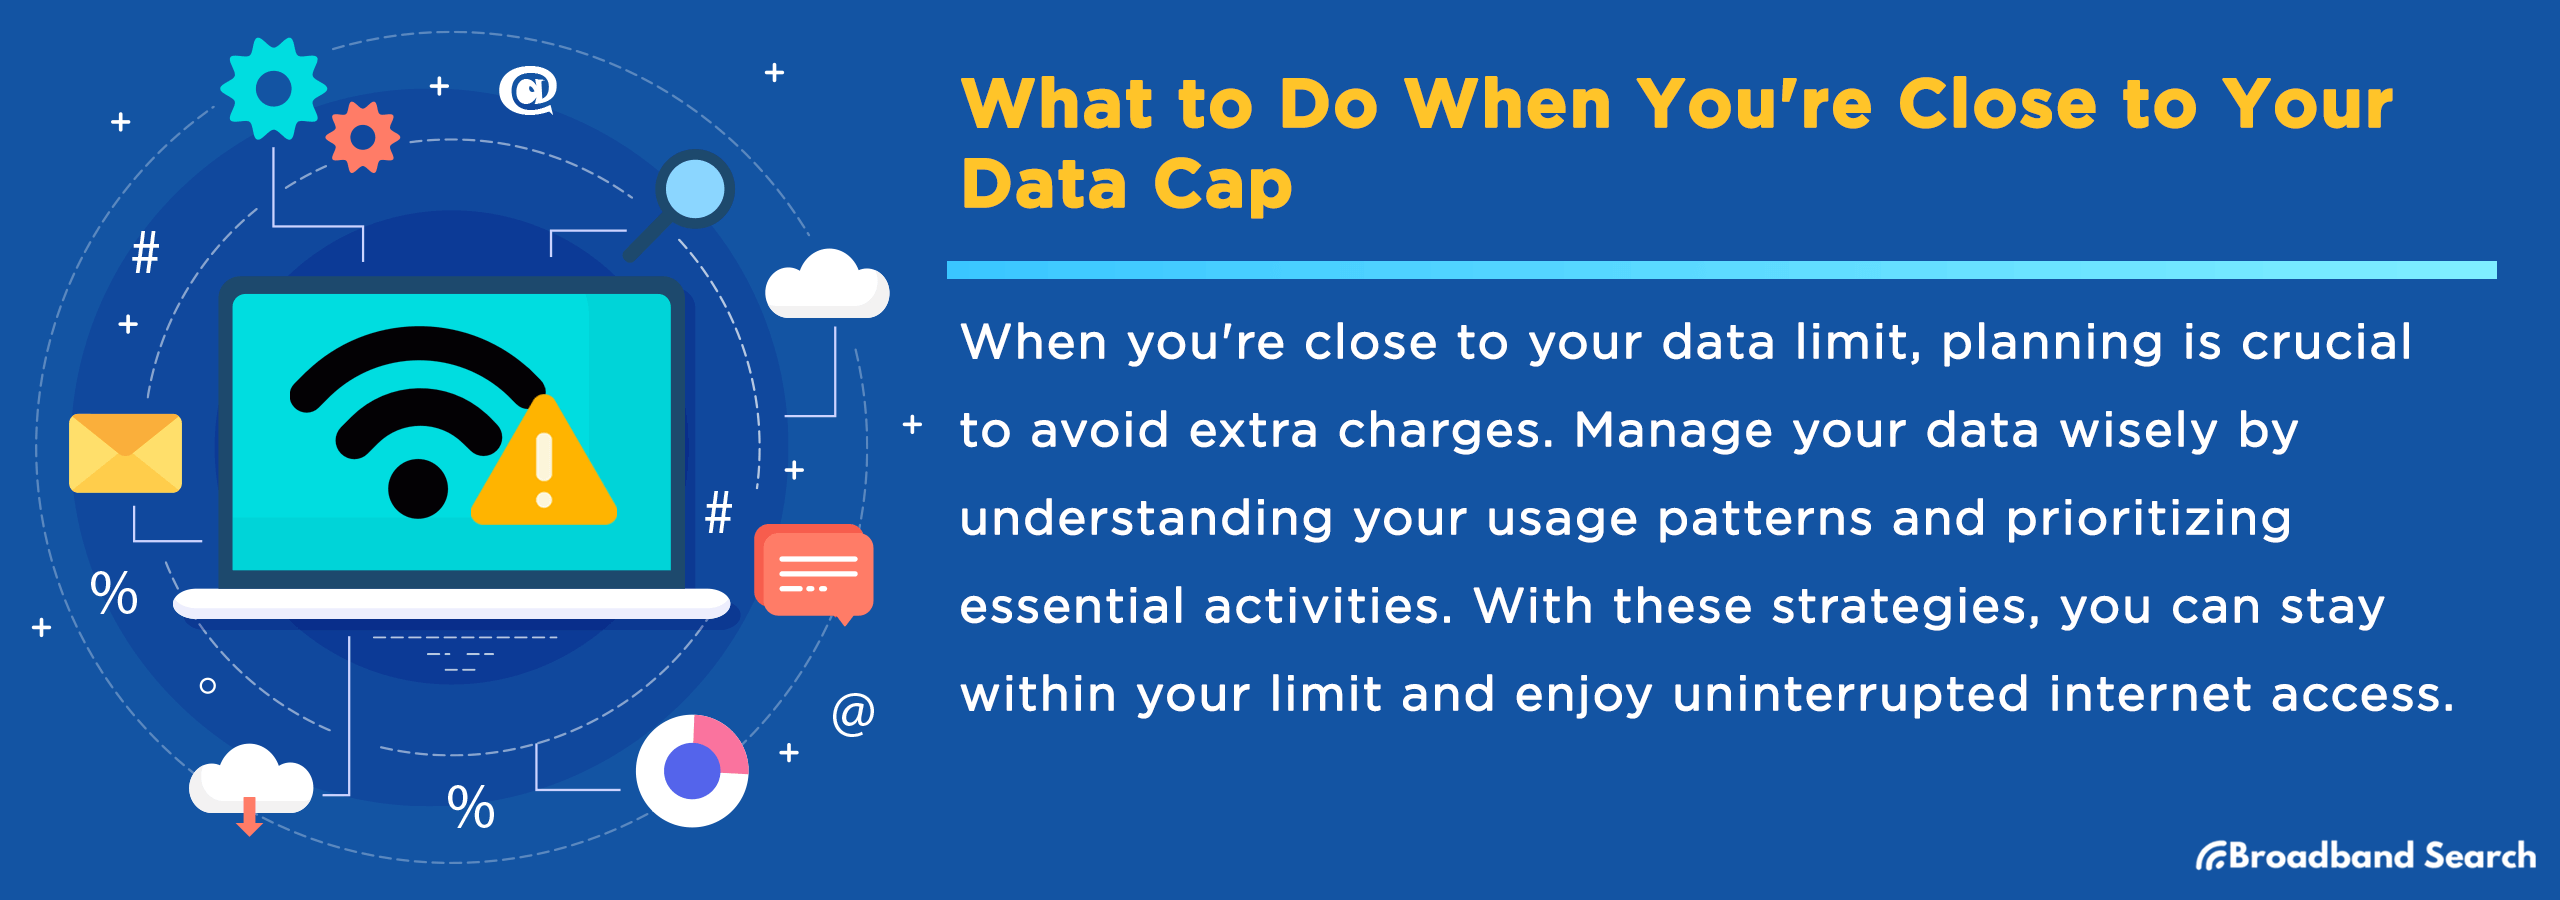 What to Do When You're Close to Your Data Cap